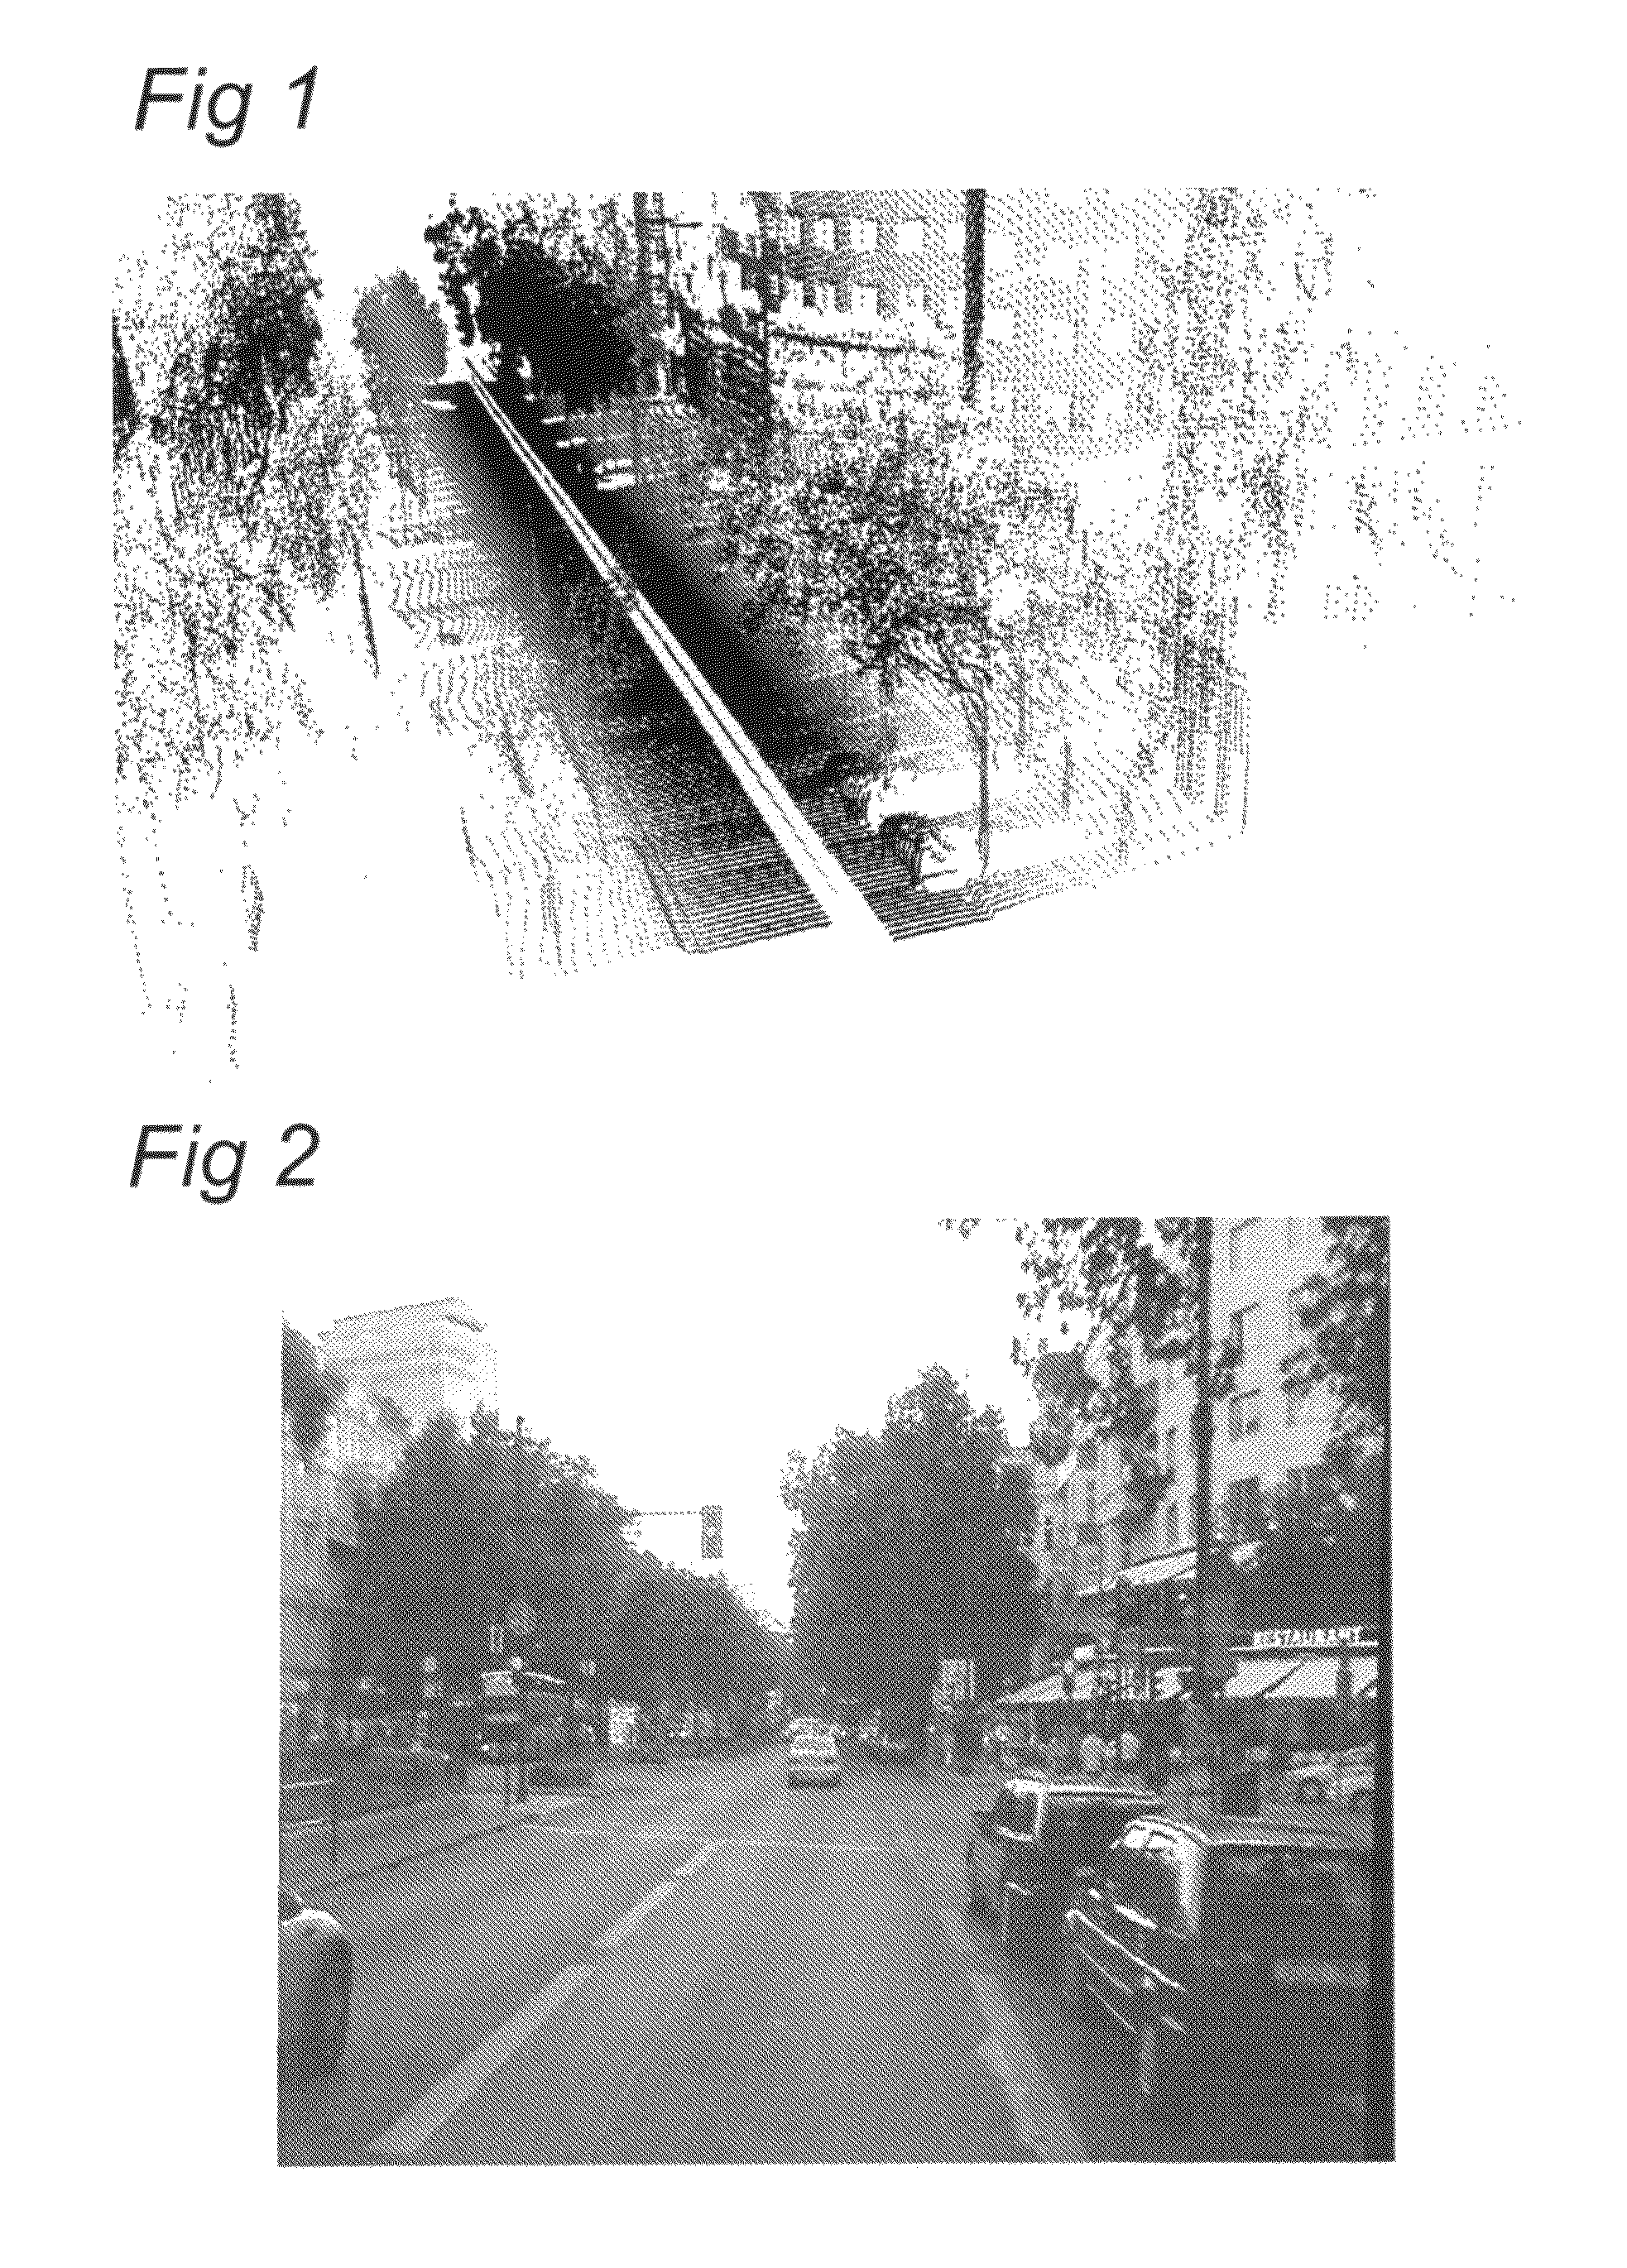 Method and apparatus for detecting objects from terrestrial based mobile mapping data